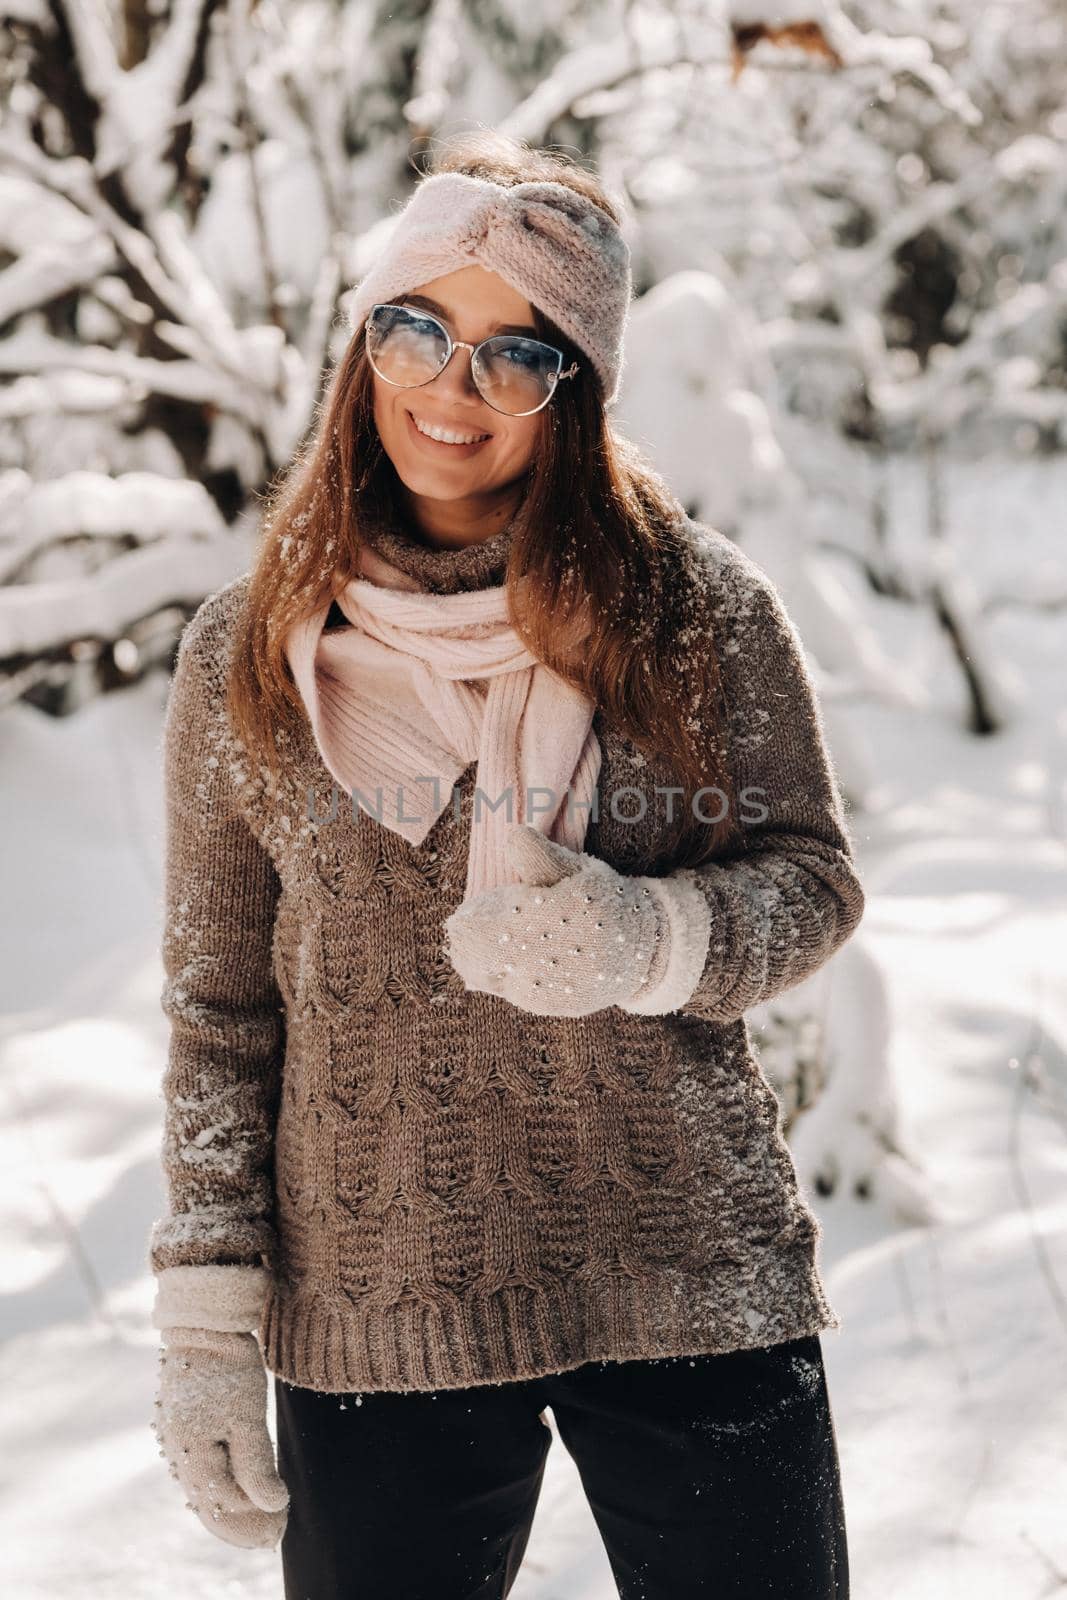 A girl in a sweater and glasses in winter in a snow-covered forest by Lobachad